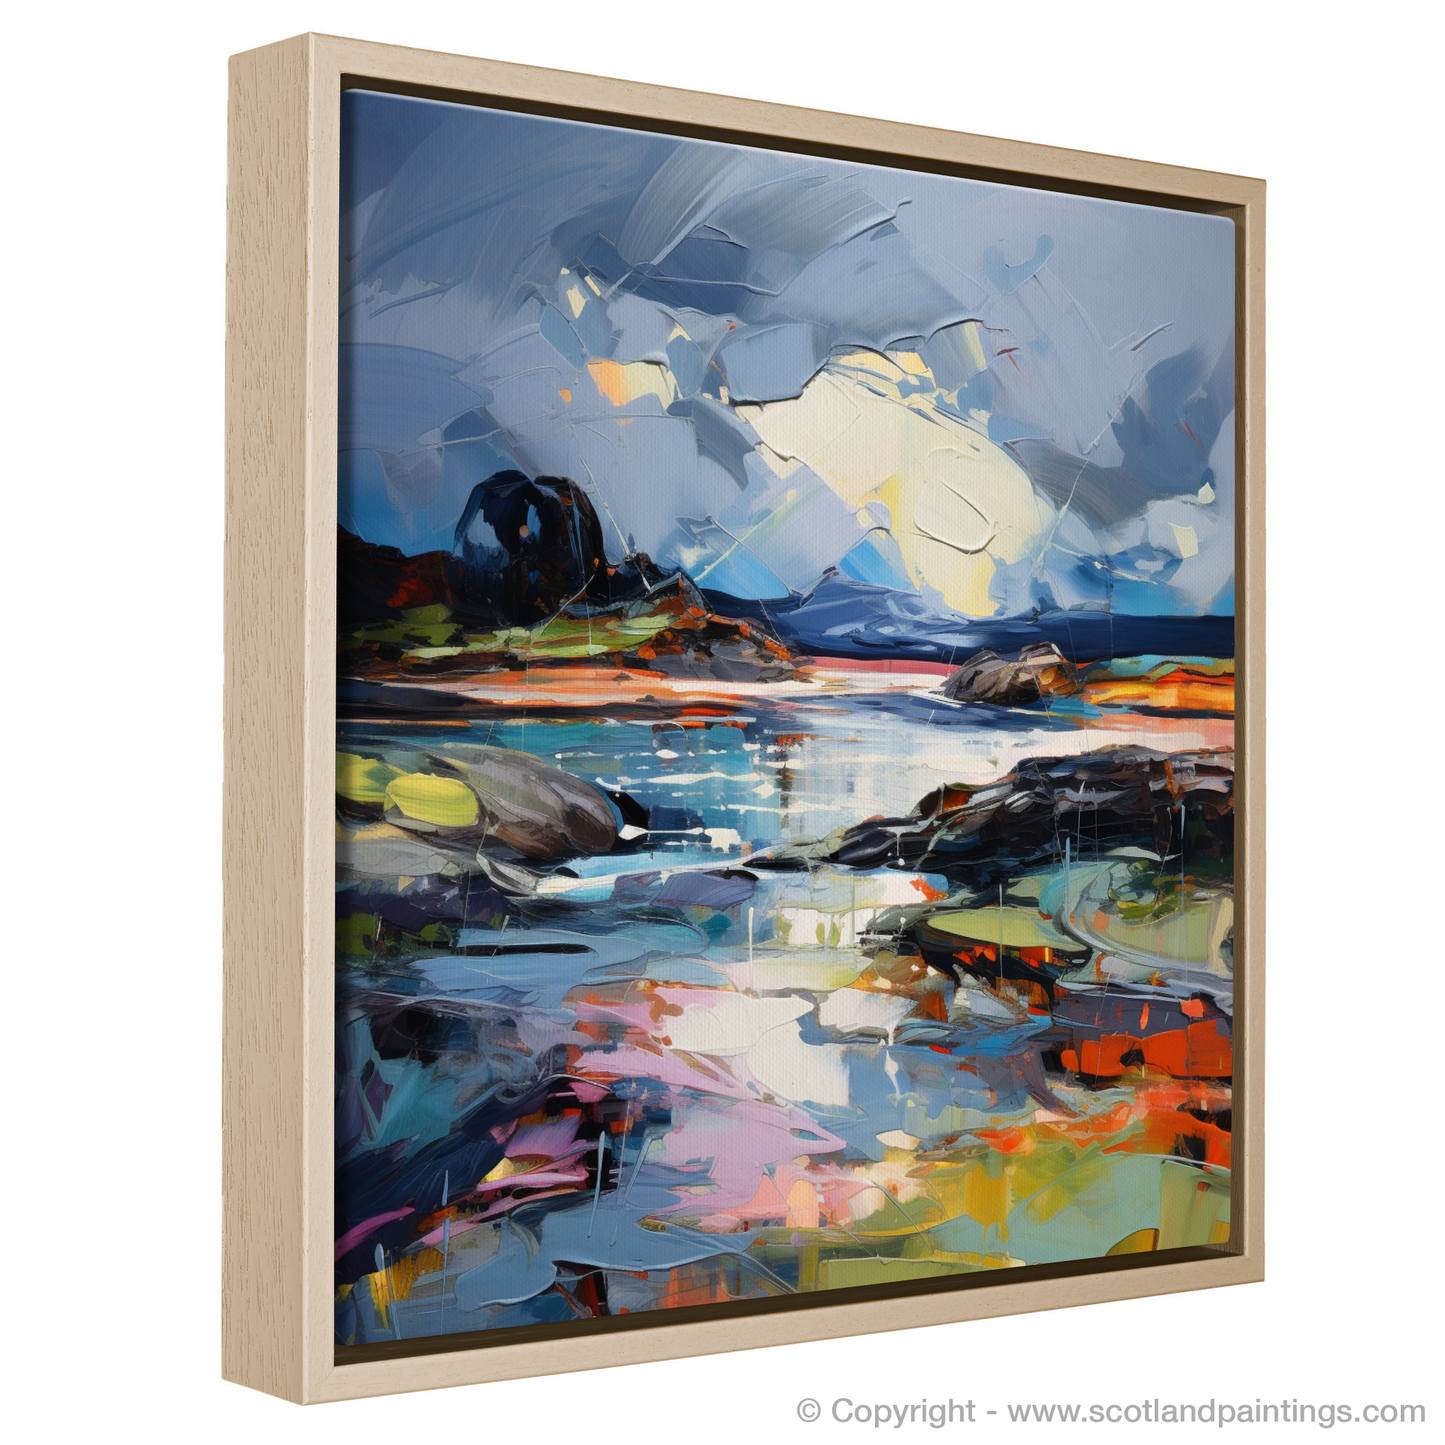 Painting and Art Print of Ardtun Bay with a stormy sky entitled "Storm over Ardtun Bay: An Expressionist Odyssey".